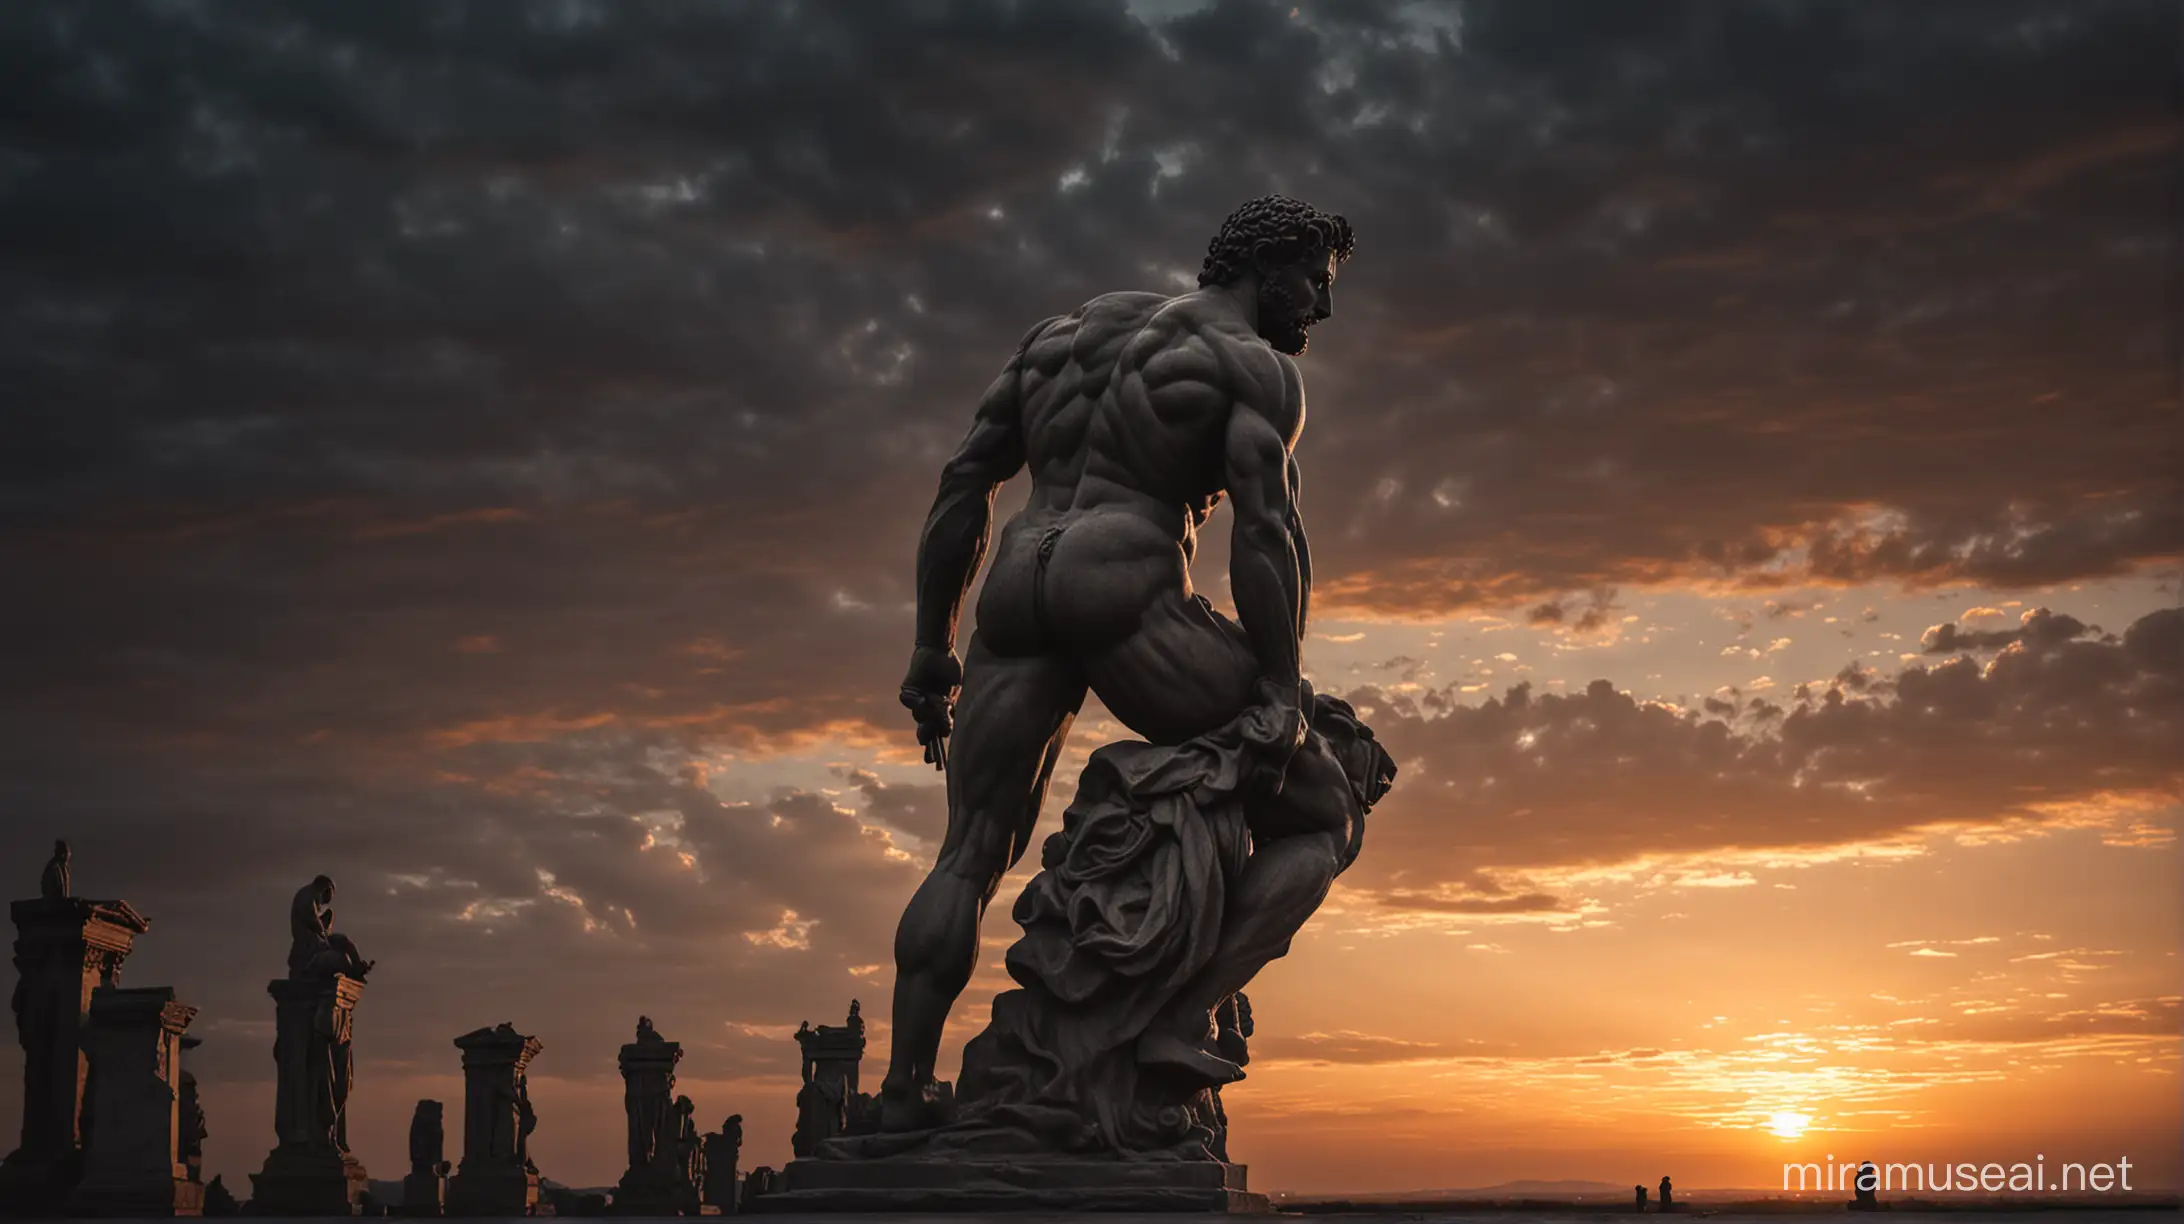 Stoic Muscular Statues at Dark Sunset